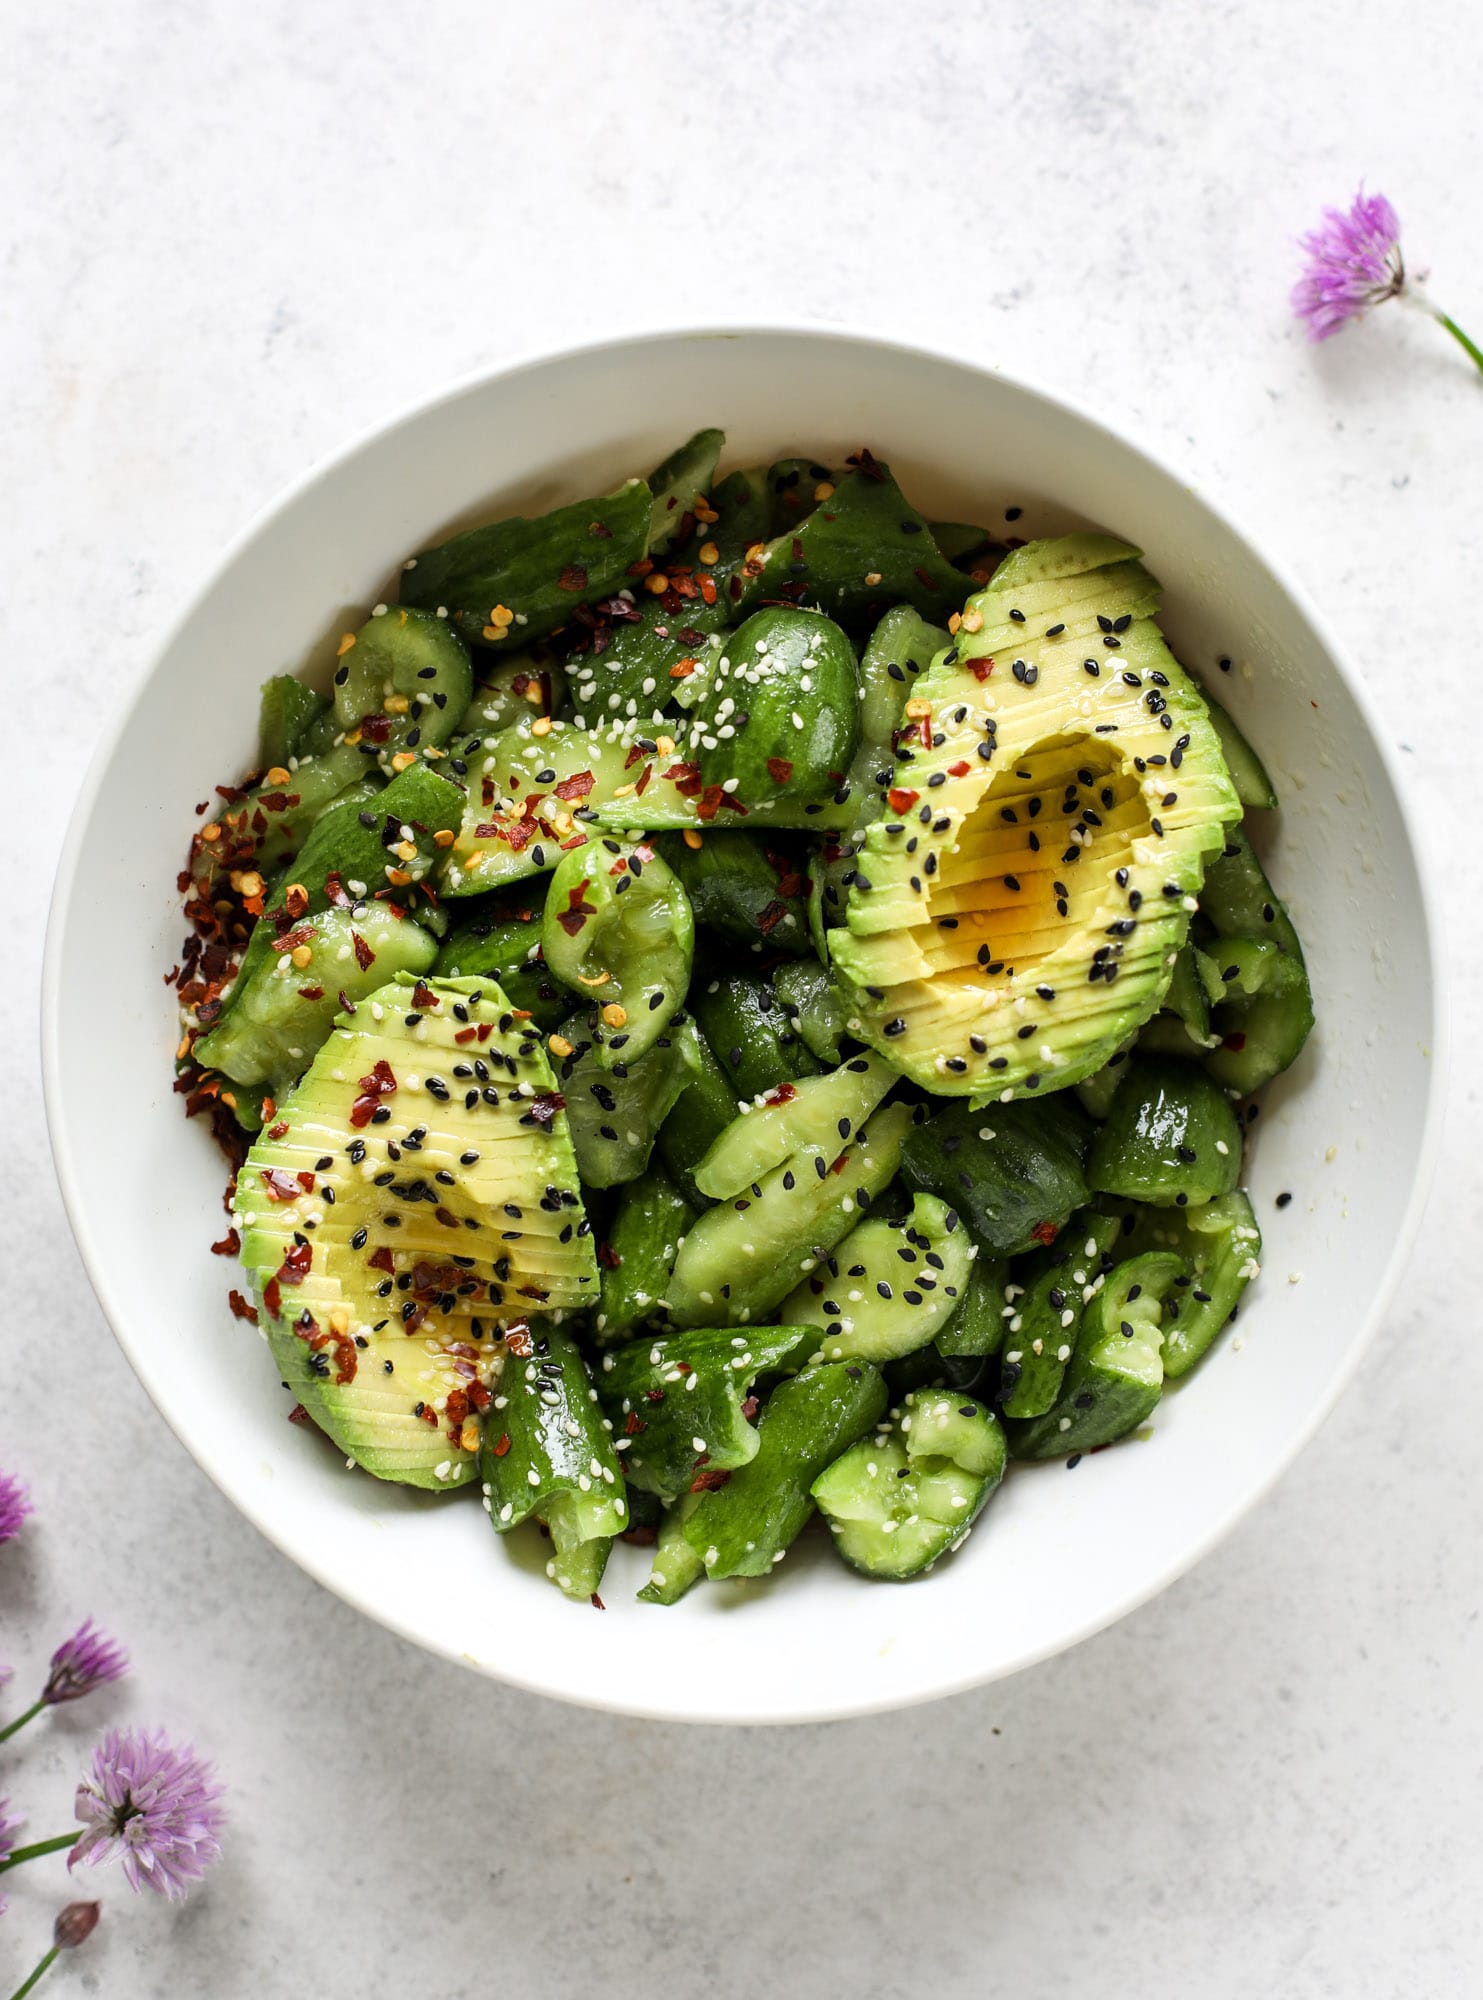 This smashed cucumber salad is so refreshing and perfect for summer! Served with avocado, toasted sesame oil and chives, it's ridiculously flavorful.